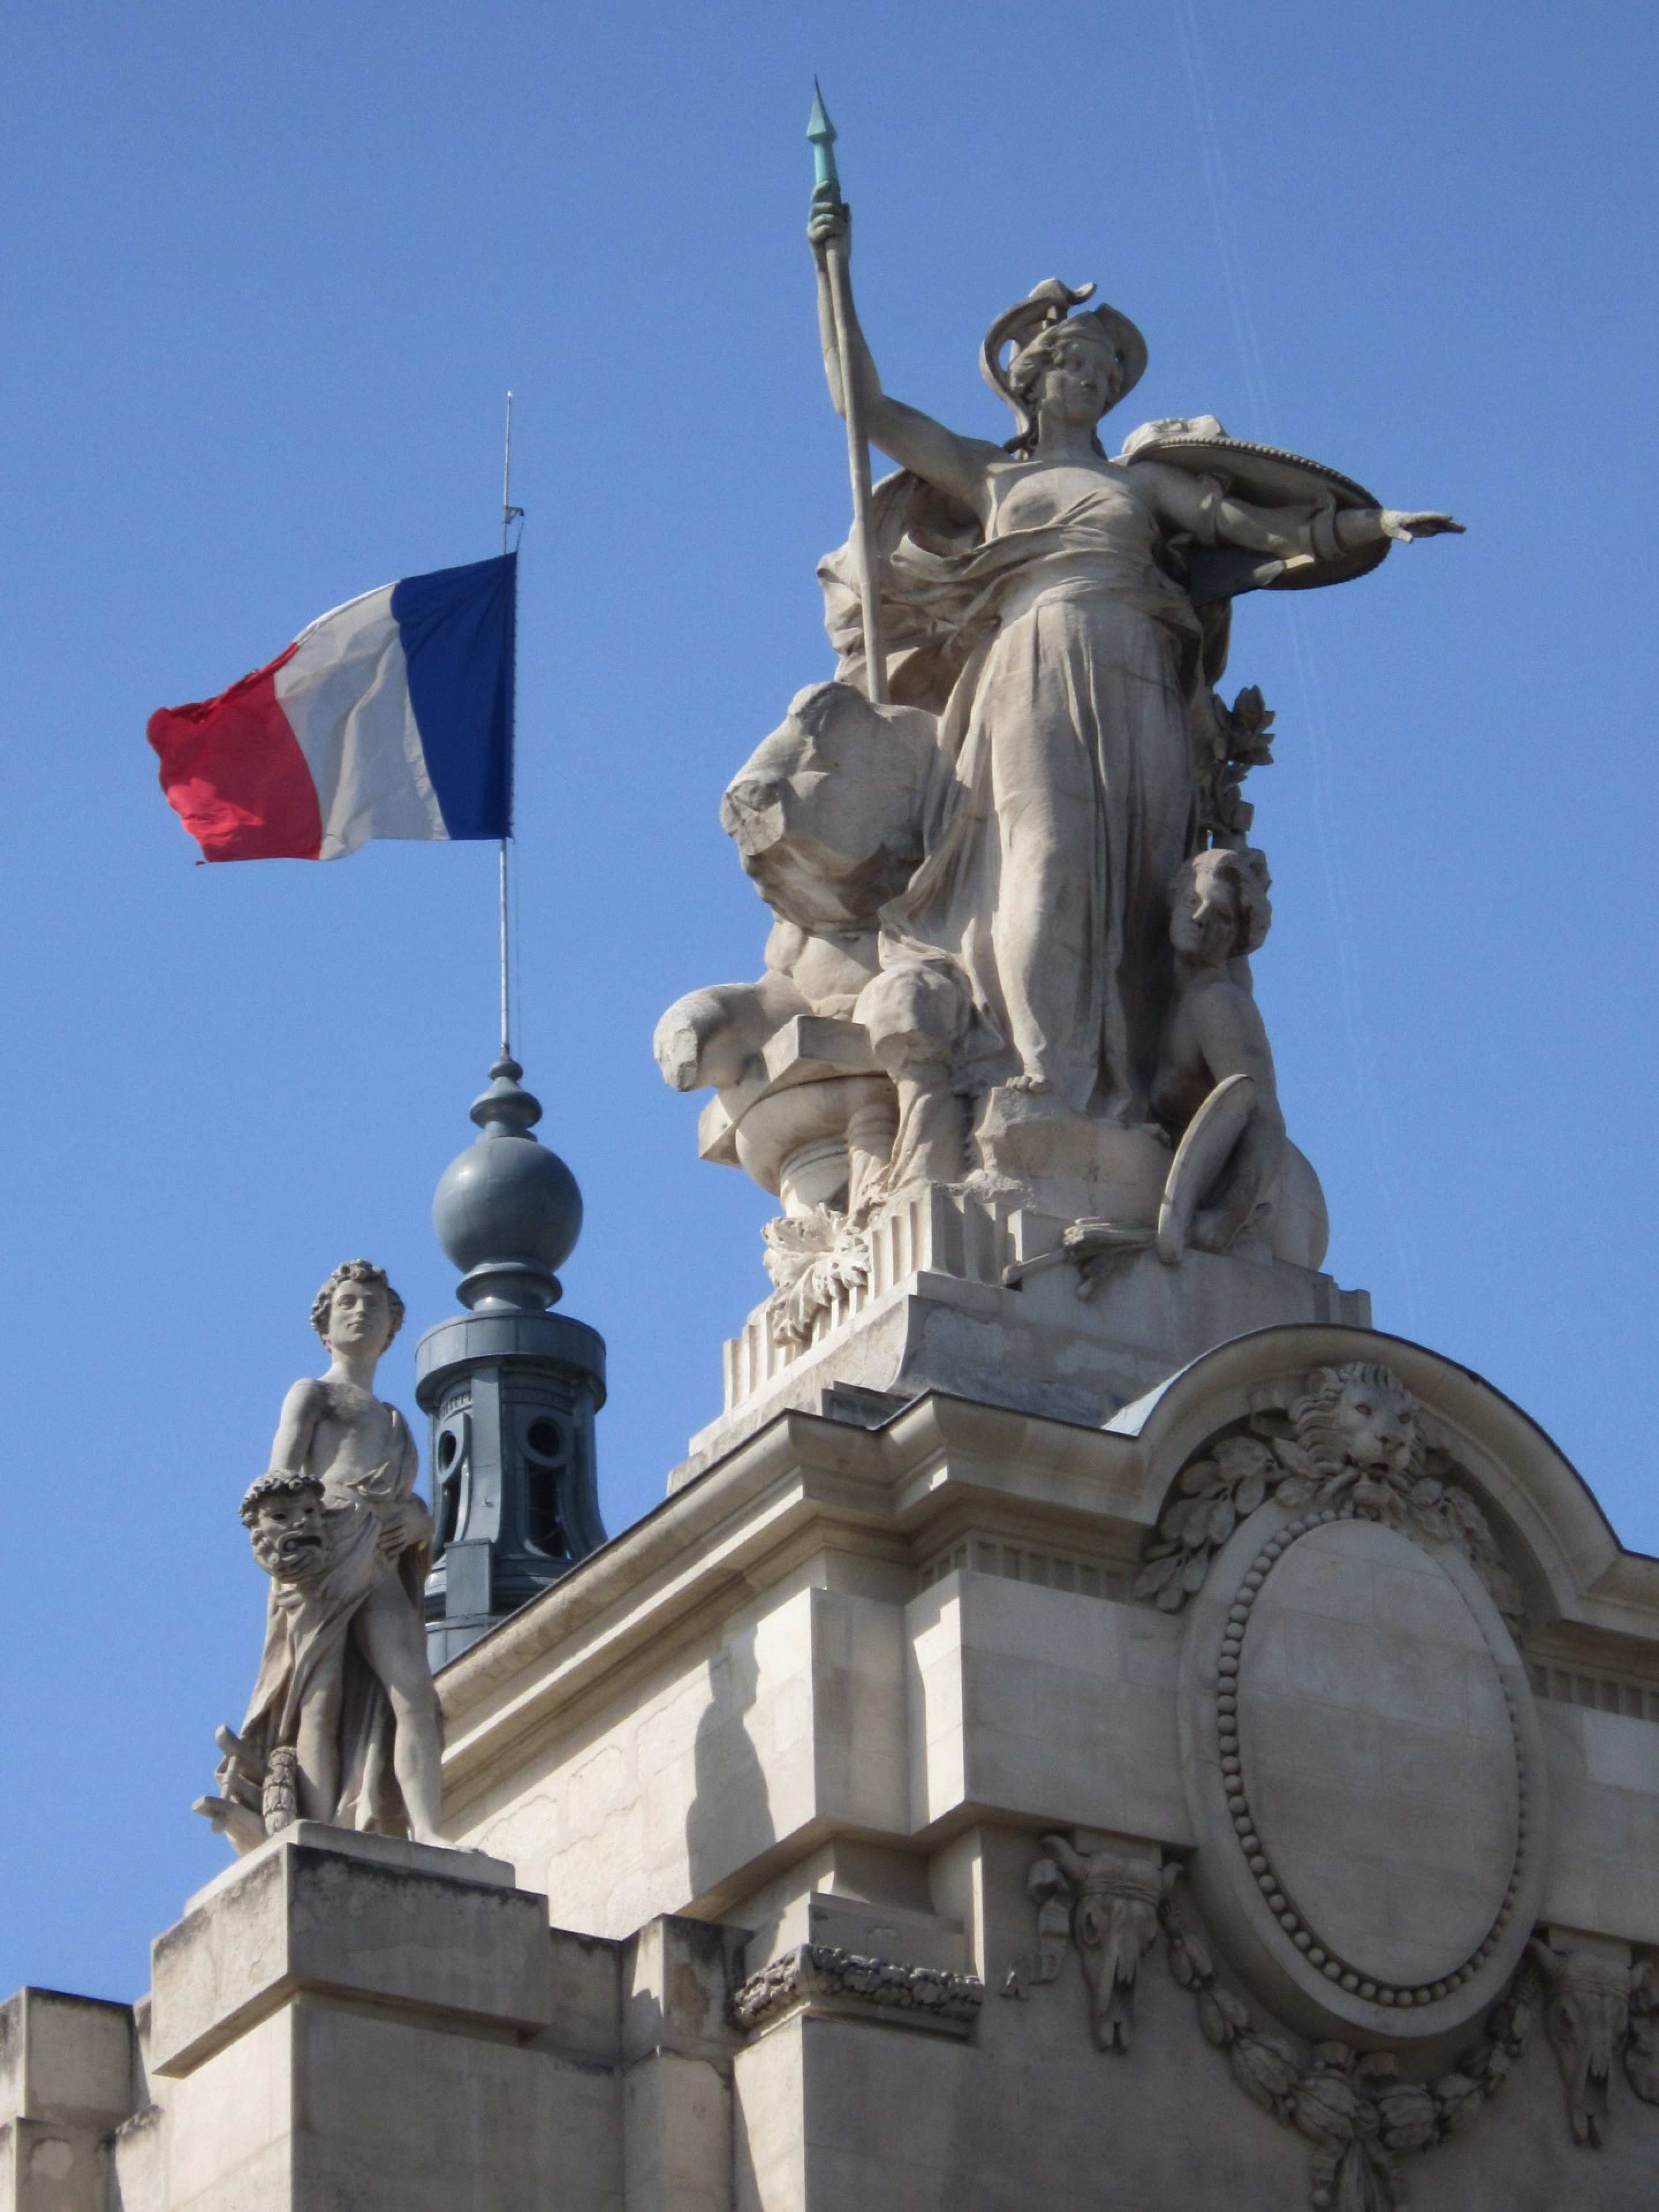 The French flag flies over a monument in Paris